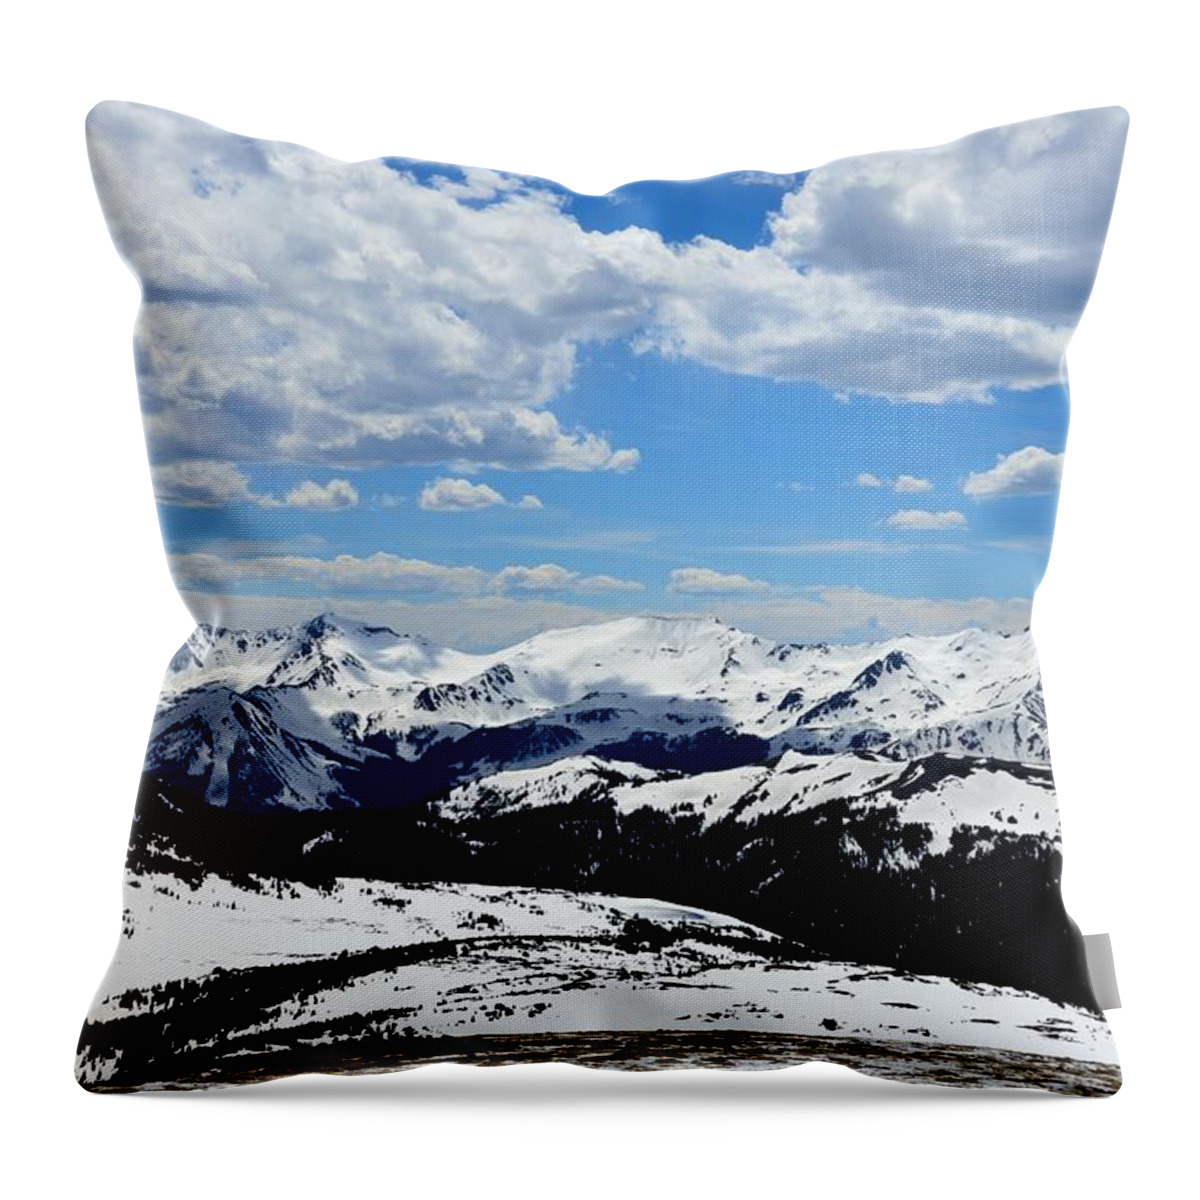 Never Throw Pillow featuring the photograph Never Summer Mountains by Tranquil Light Photography